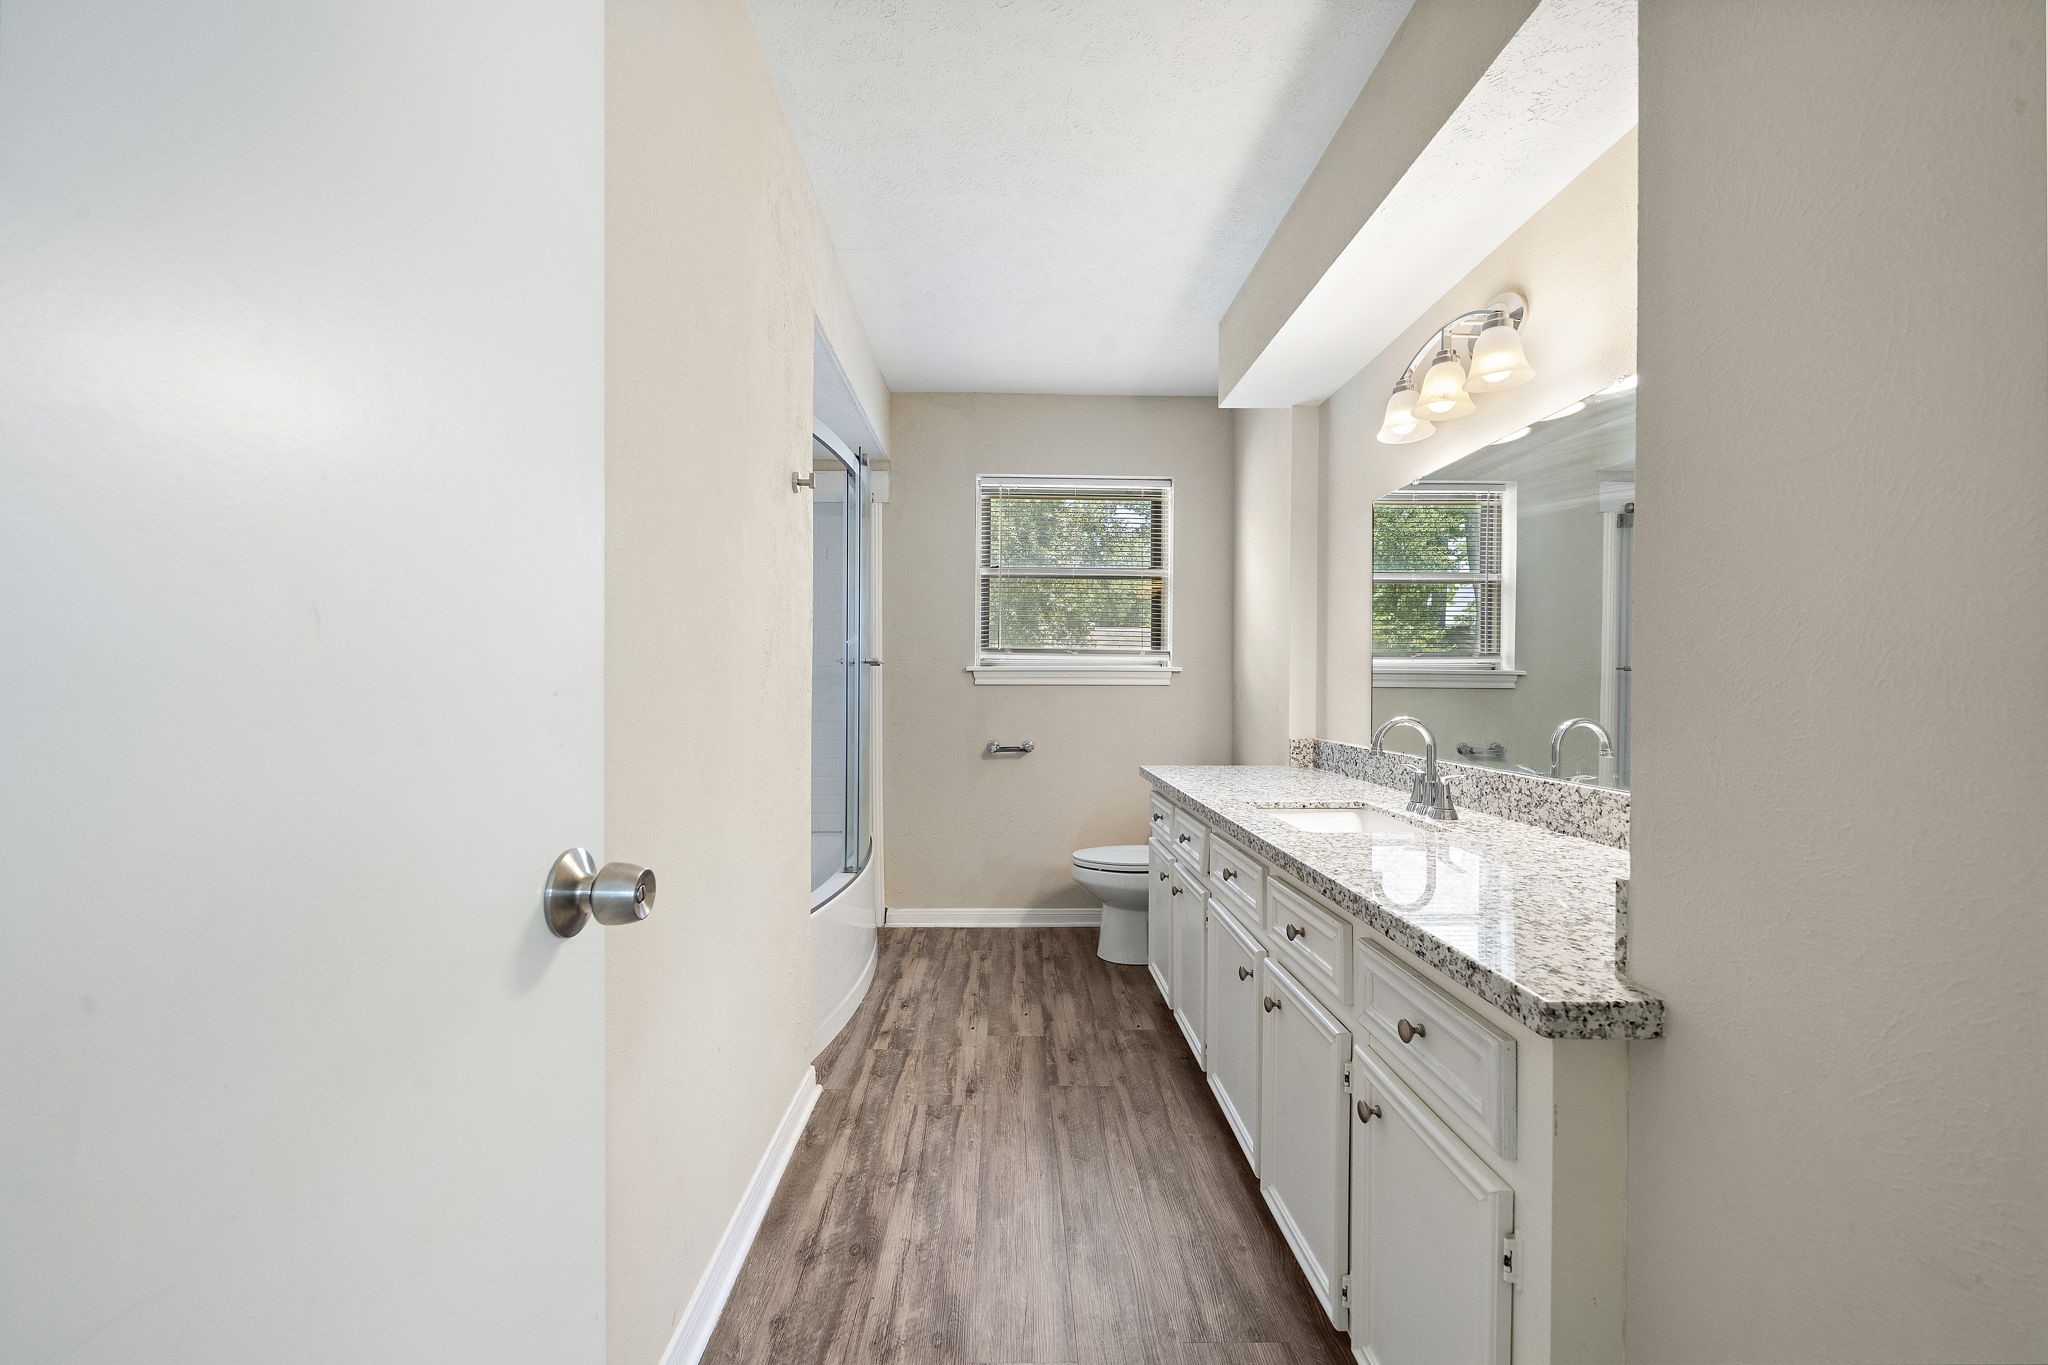 Shared updated bathroom is spacious and inviting